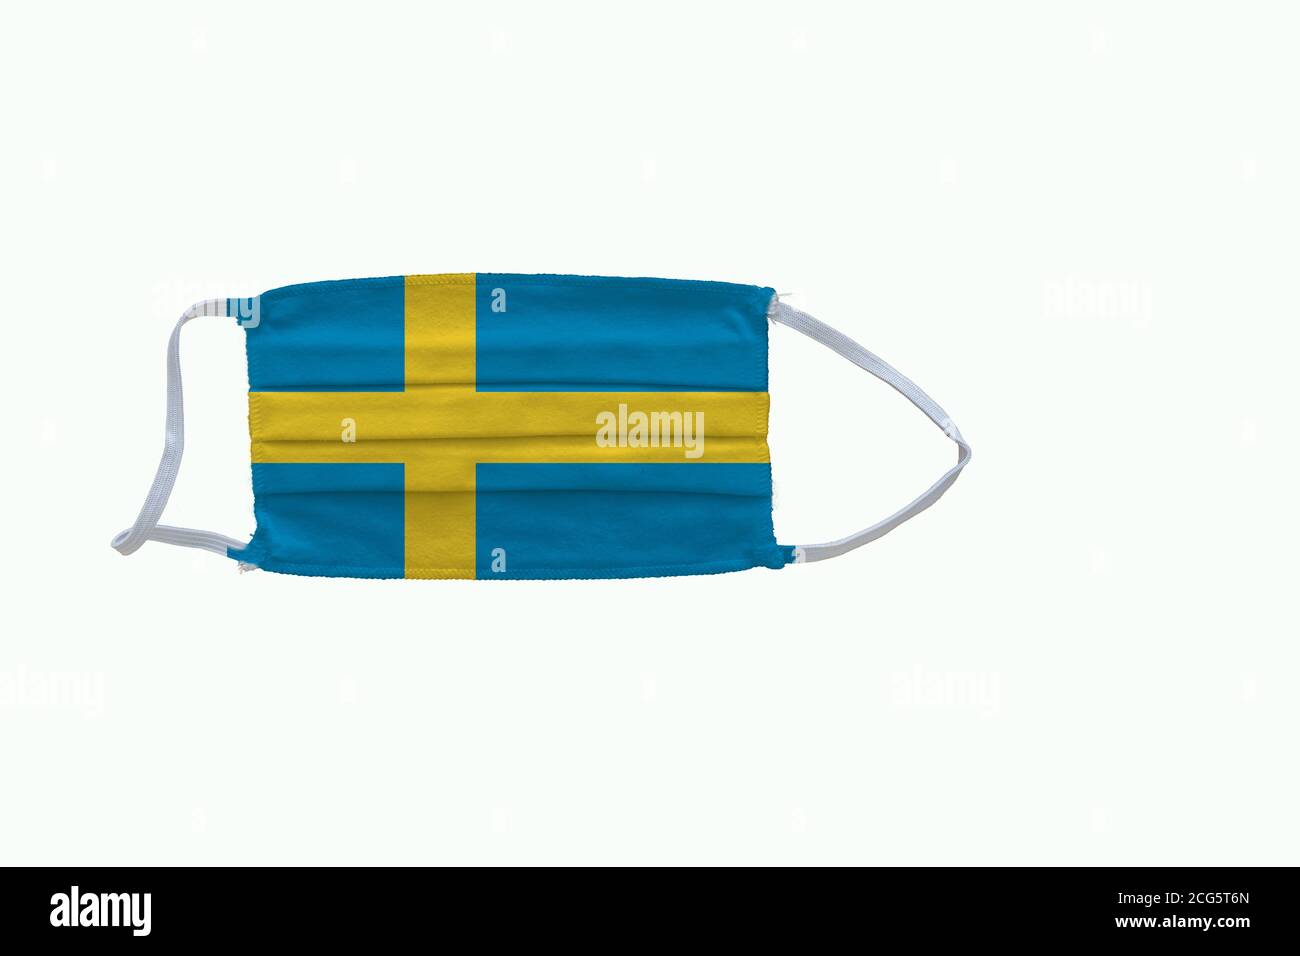 Swedish   flag design Covid-19 pandemic  virus face mask  on a white background with copy space Stock Photo